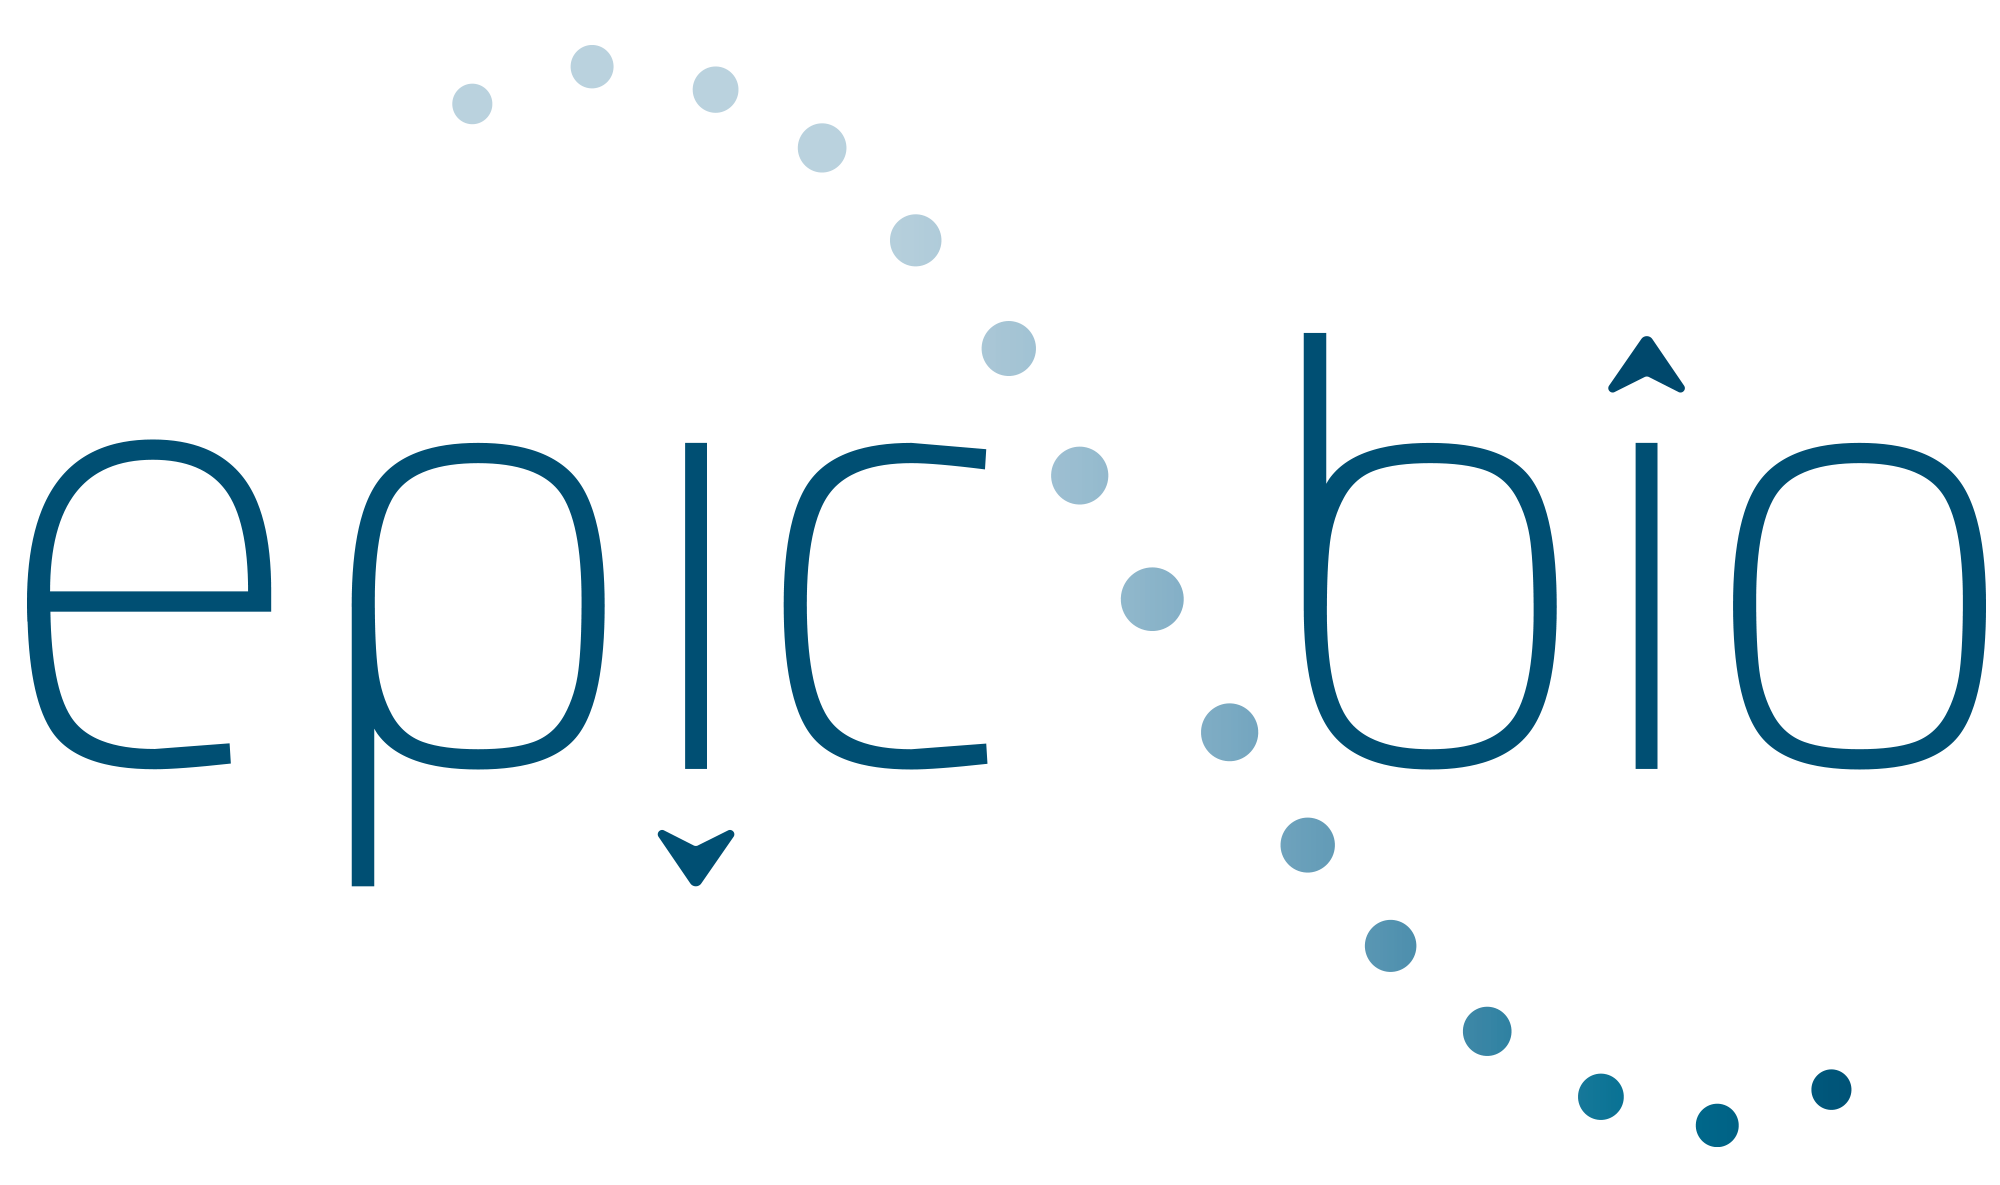 Epic Bio Presents Compelling Preclinical Data Supporting Clinical Initiation of EPI-321 for FSHD